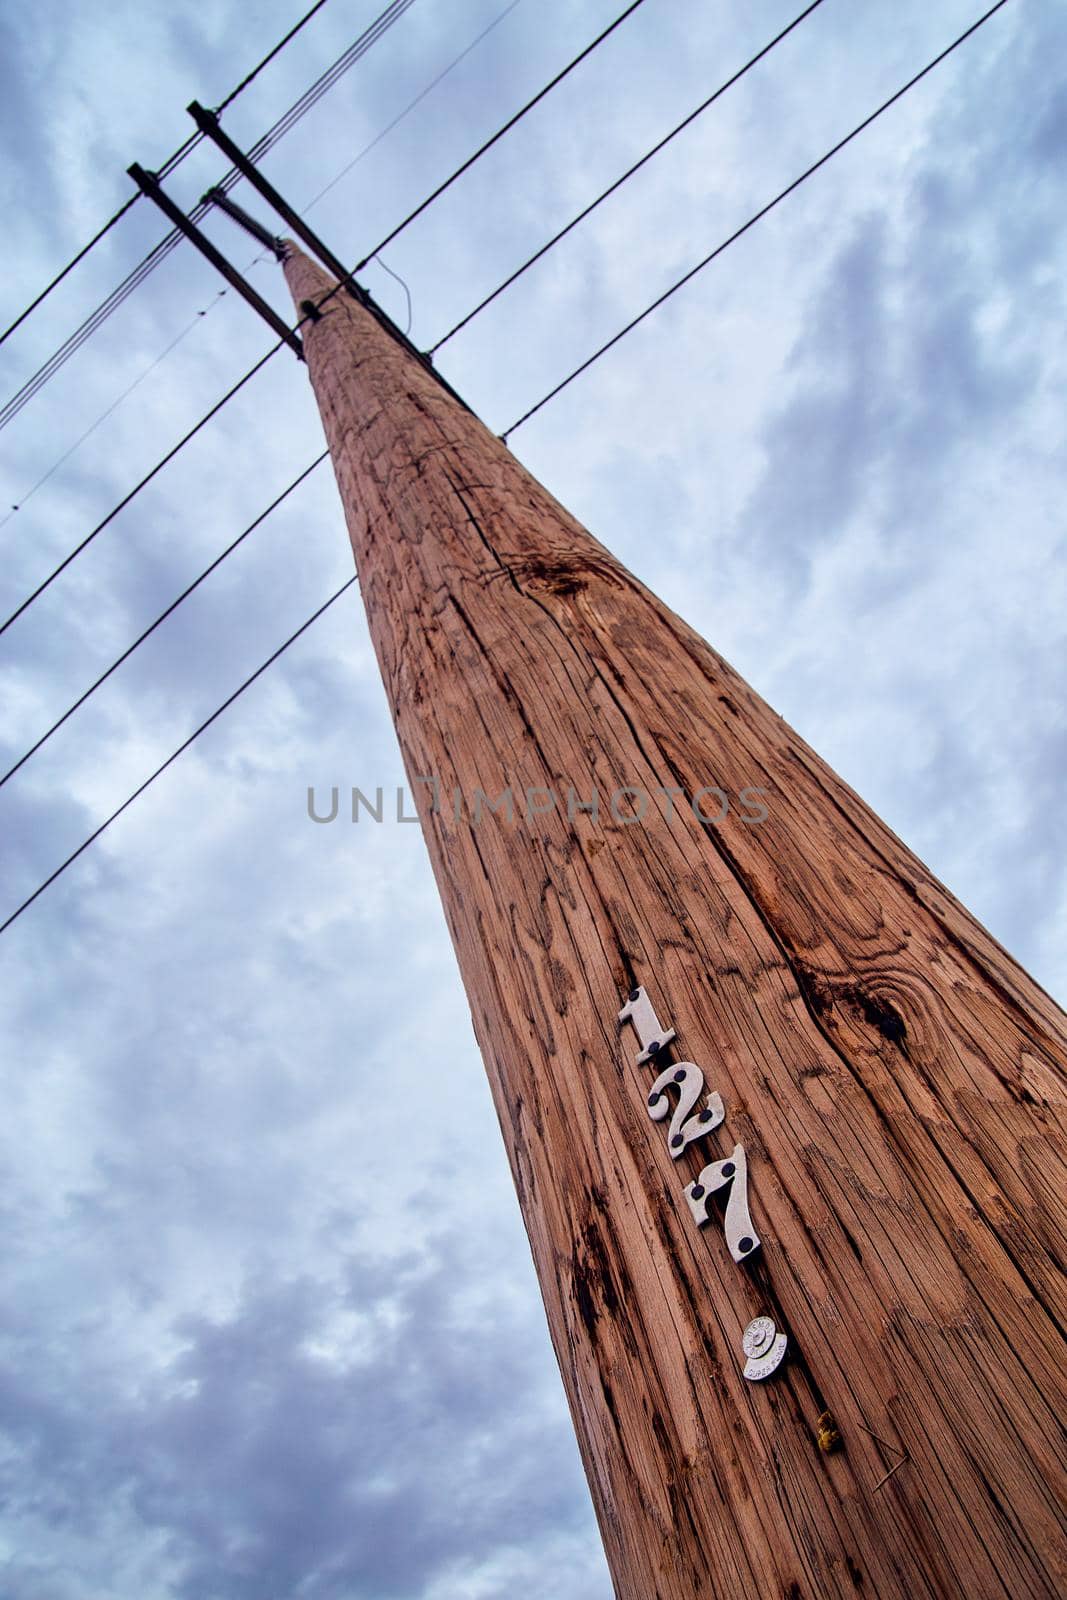 Telephone pole communications with dark clouds by njproductions